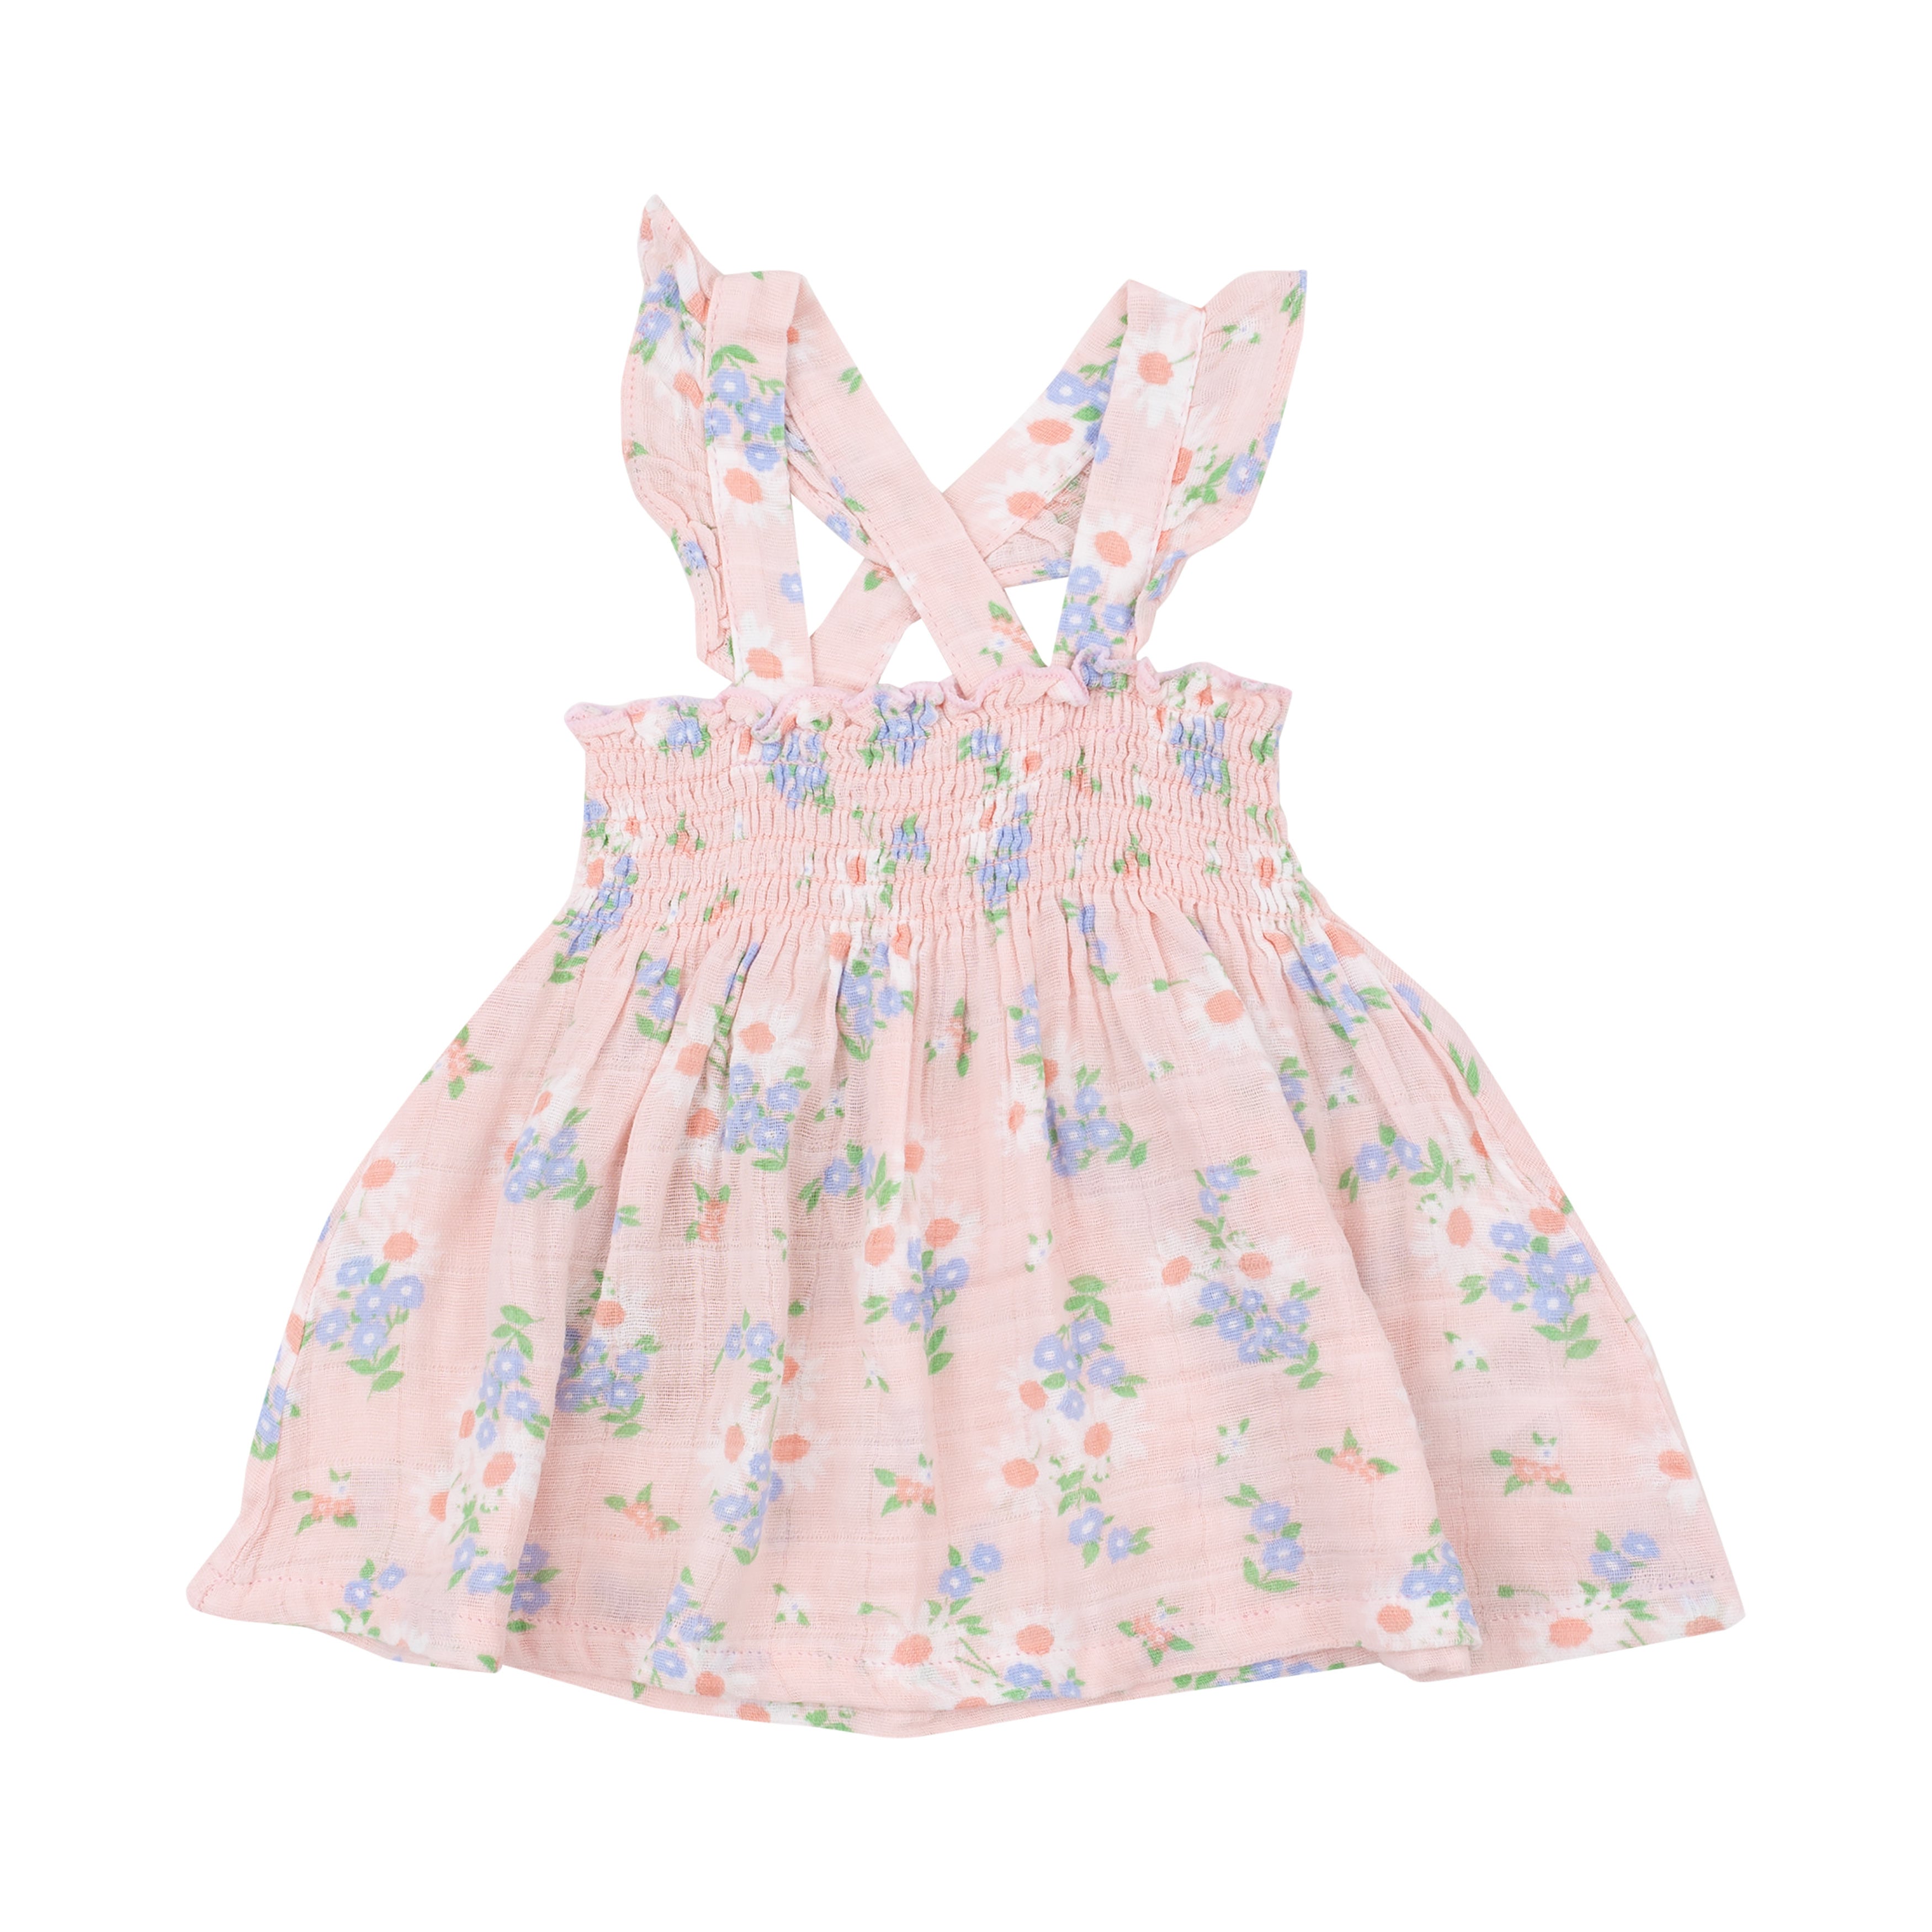 Ruffle Strap Smocked Top And Diaper Cover - Gathering Daisies